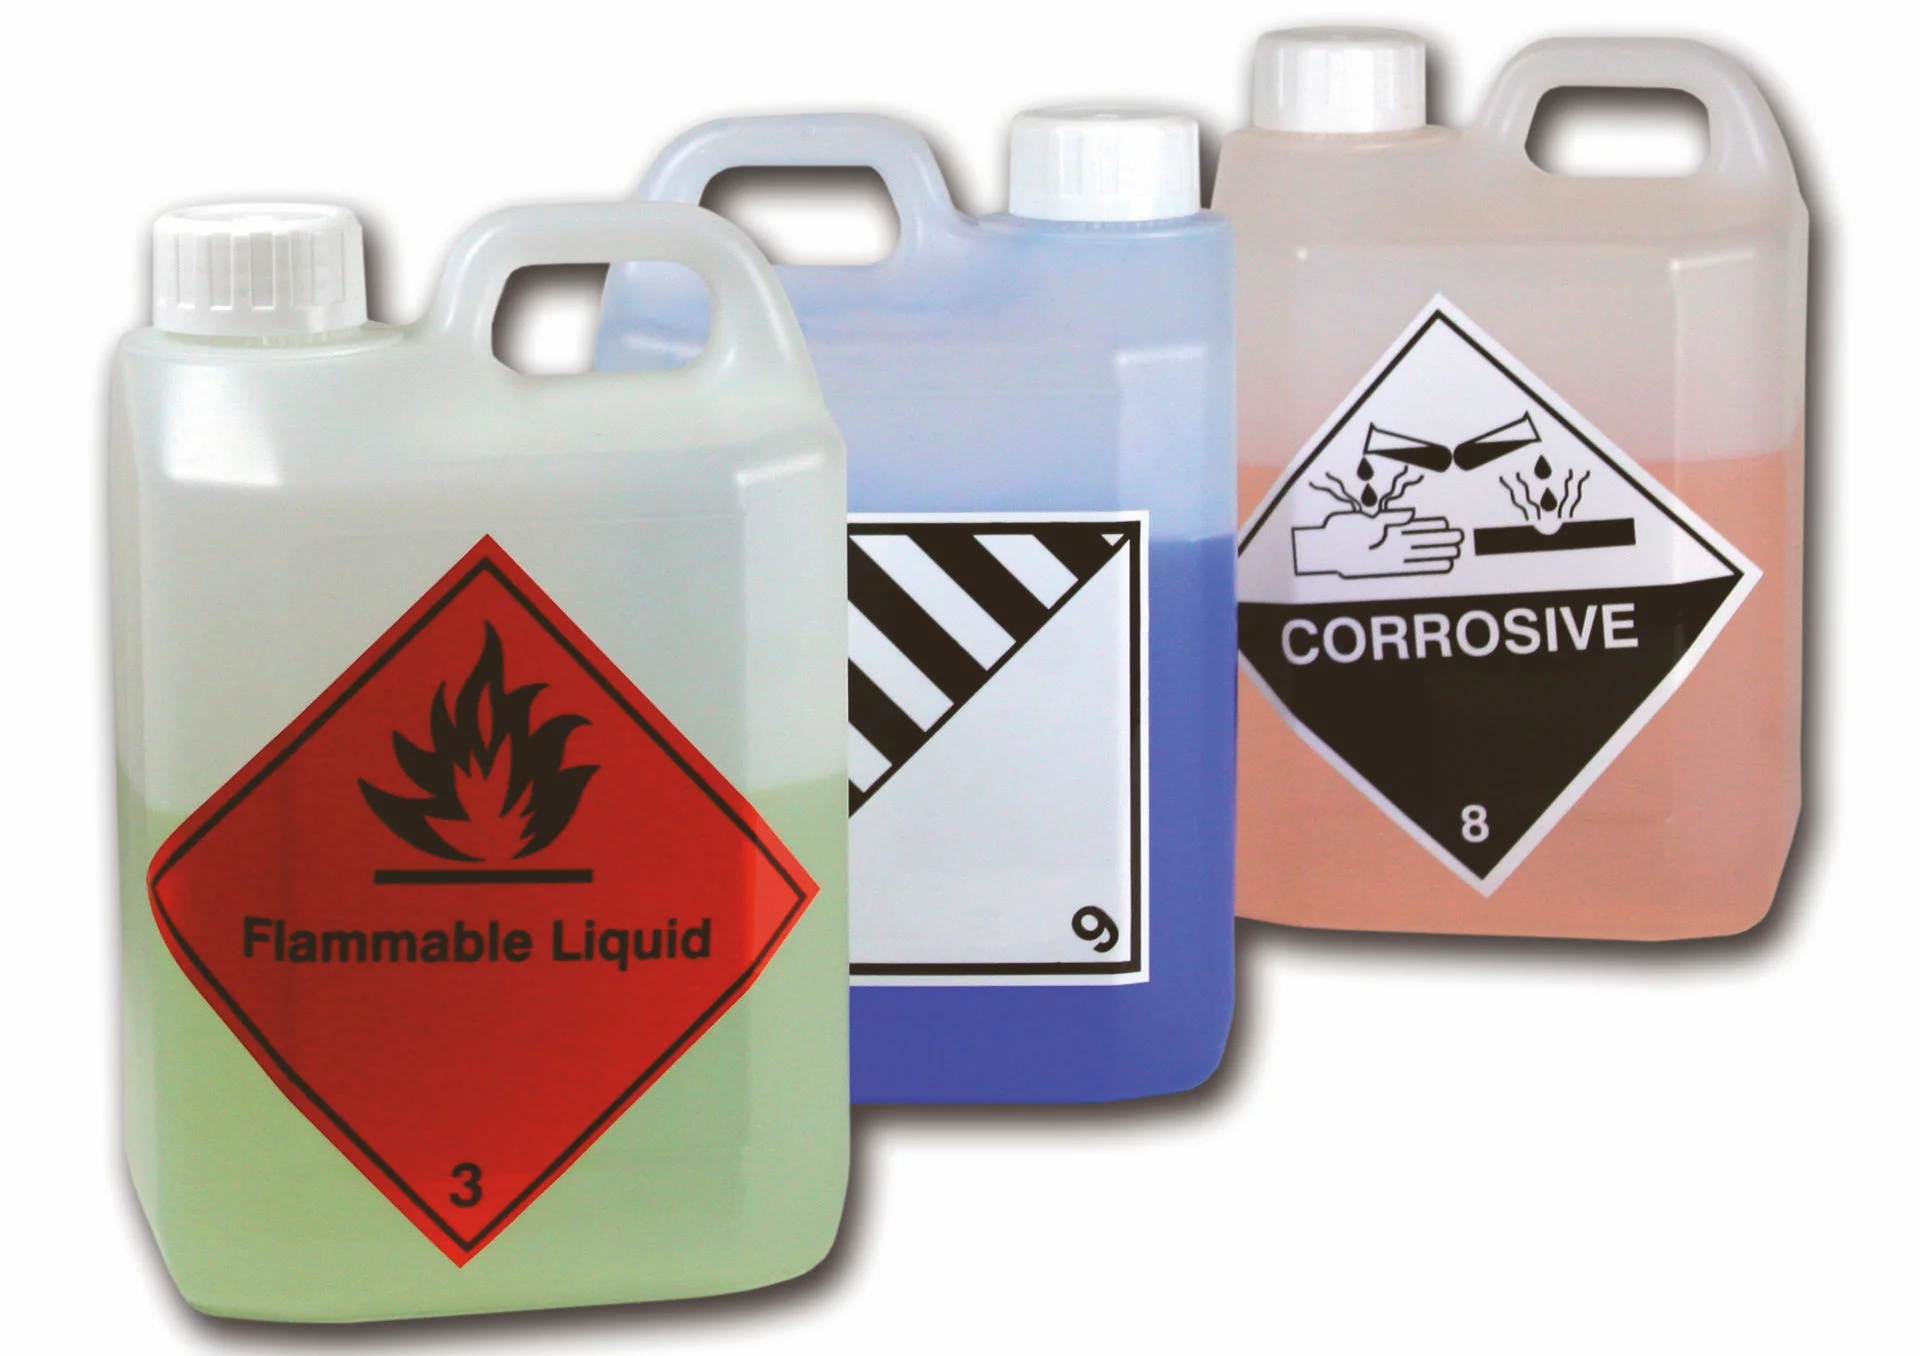 Suppliers Of Waterproof Car Wash Labels For The Car Wash Industry In Bury Saint Edmunds